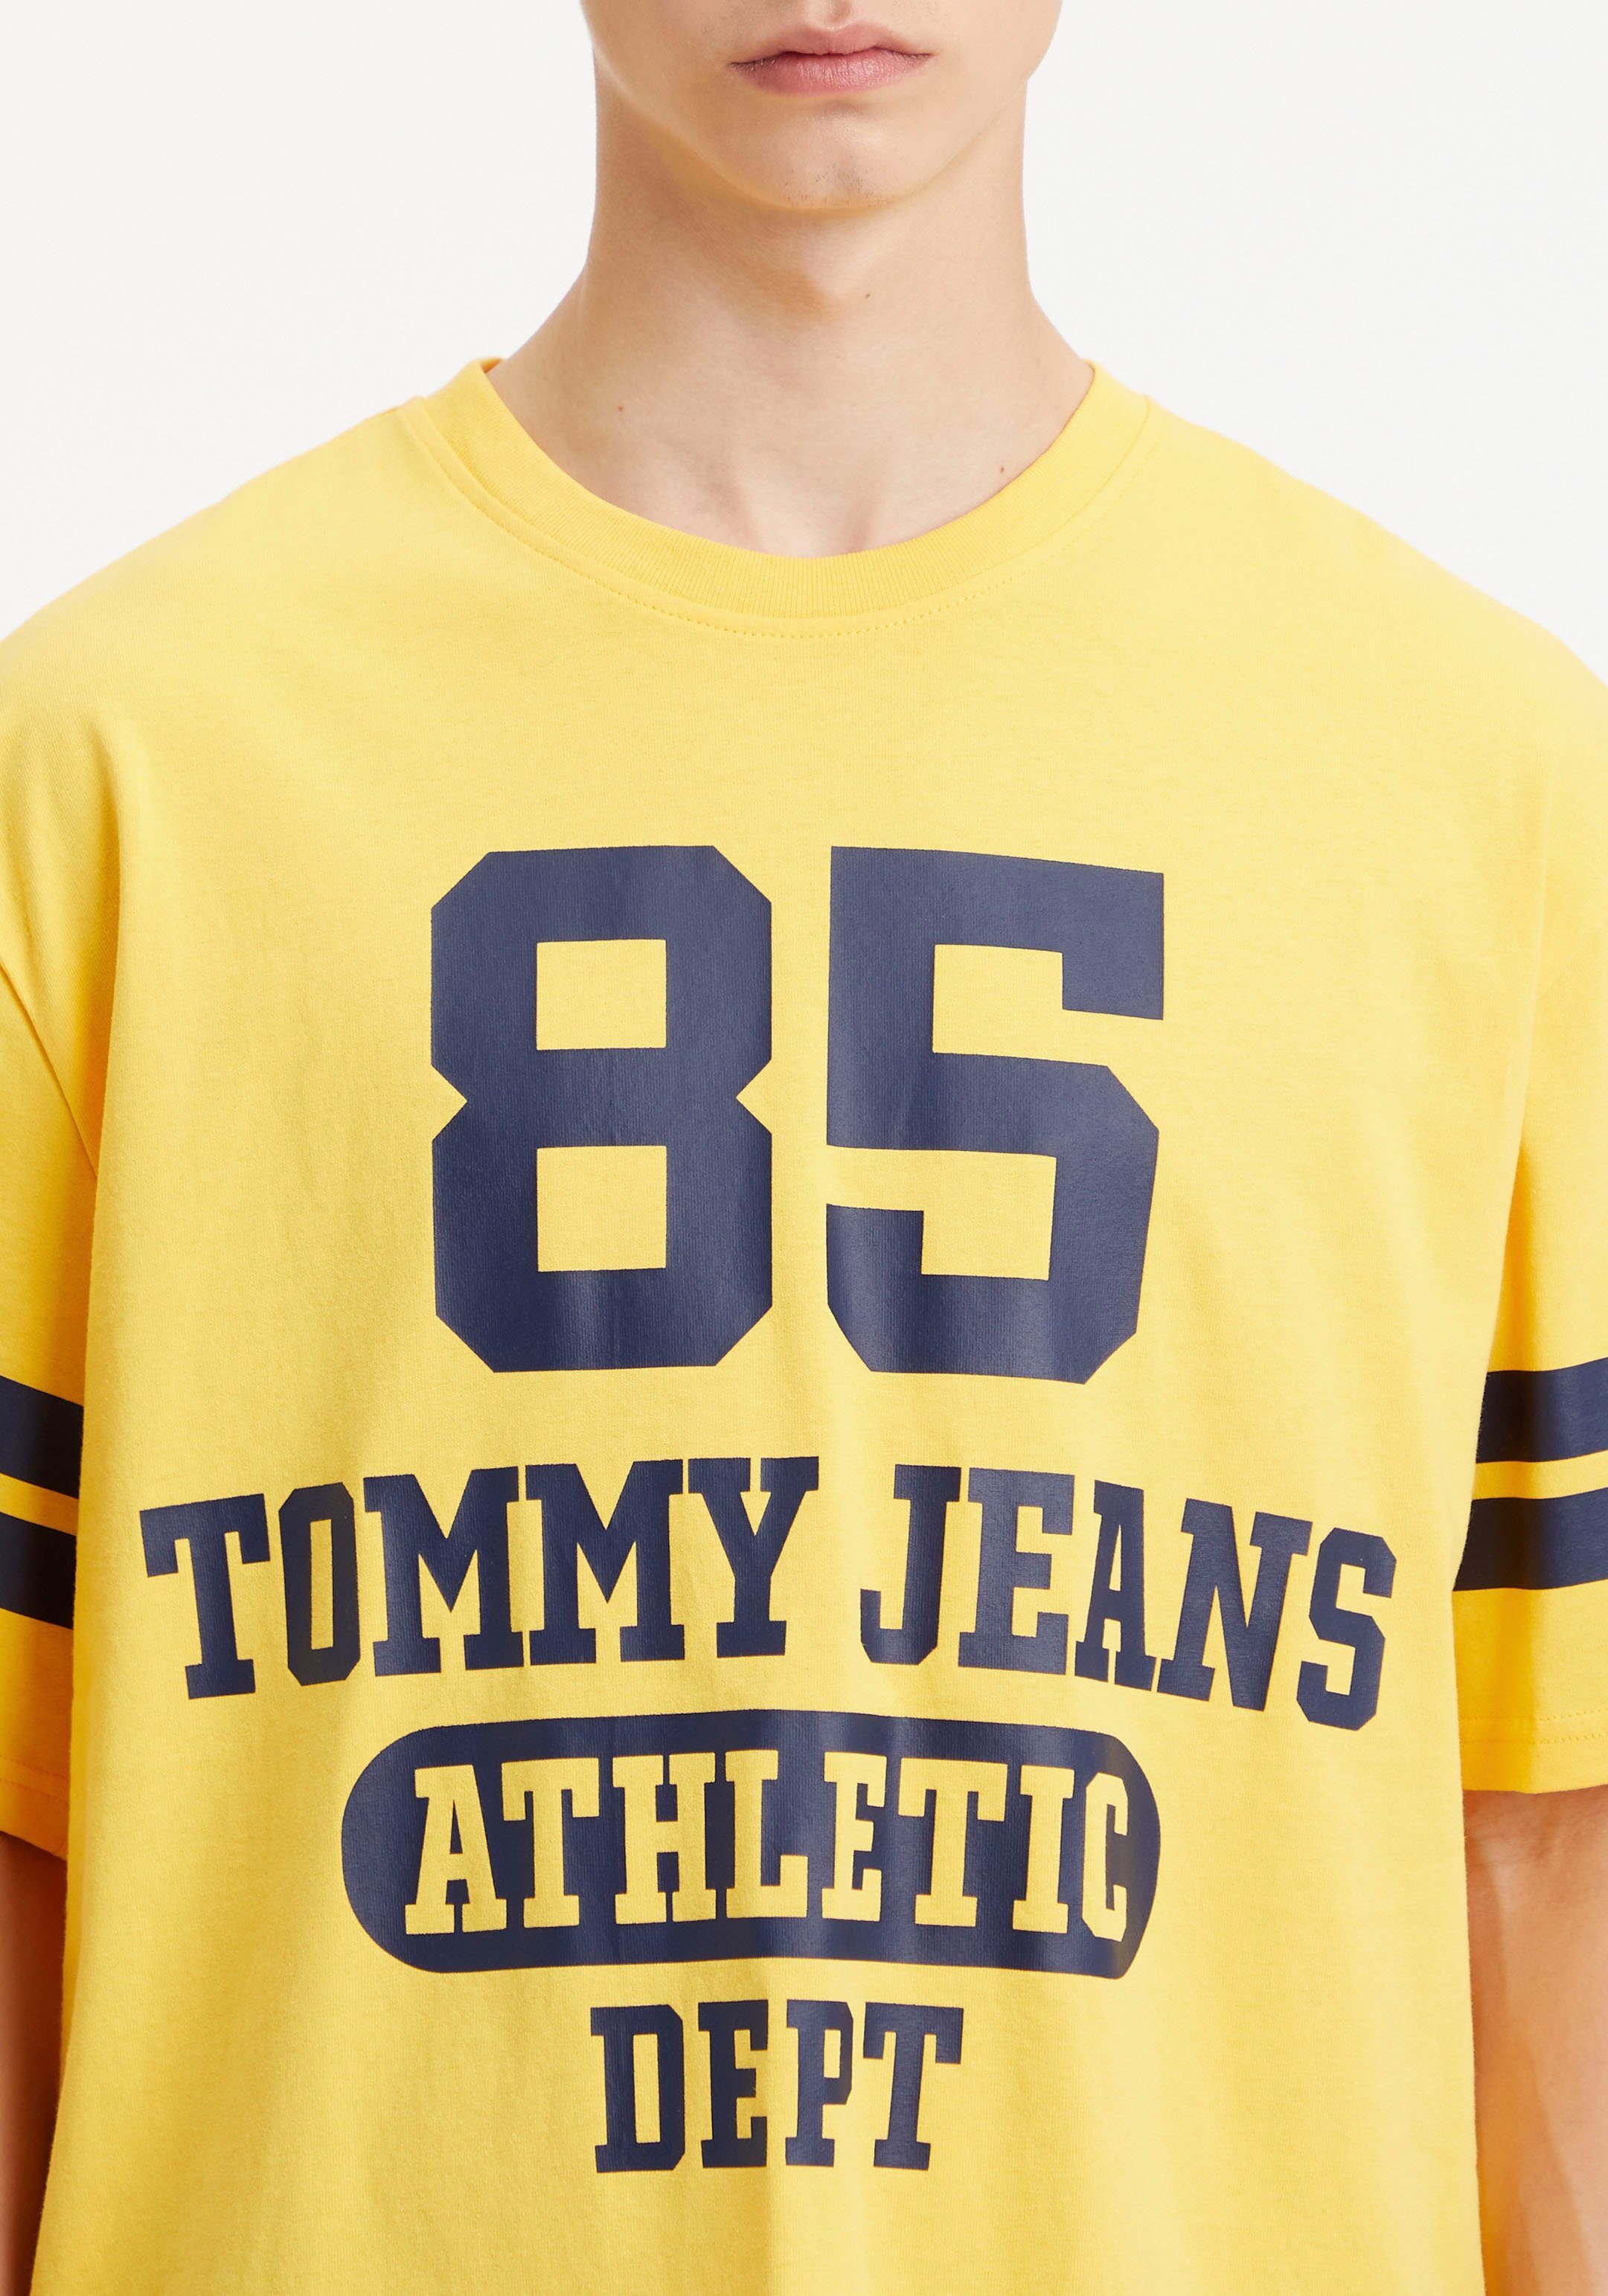 COLLEGE Yellow Jeans 85 LOGO TJM SKATER Tommy T-Shirt Warm